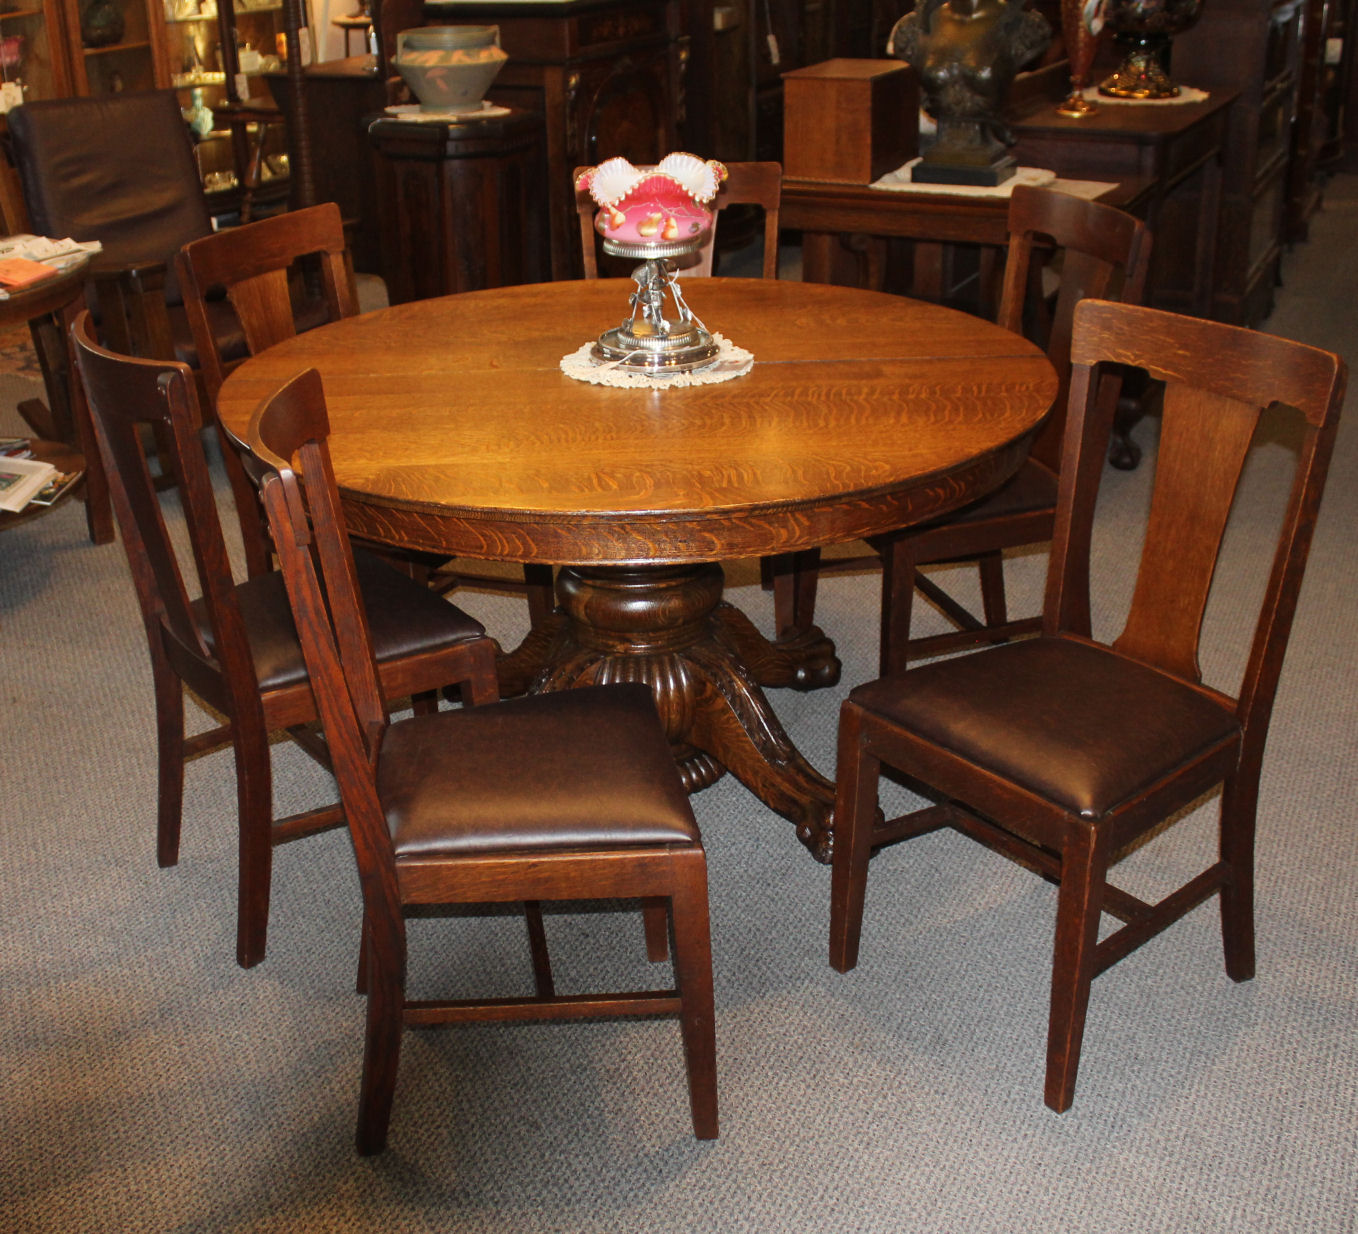 mission style dining room chairs for sale Chairs dining oak style mission antique furniture